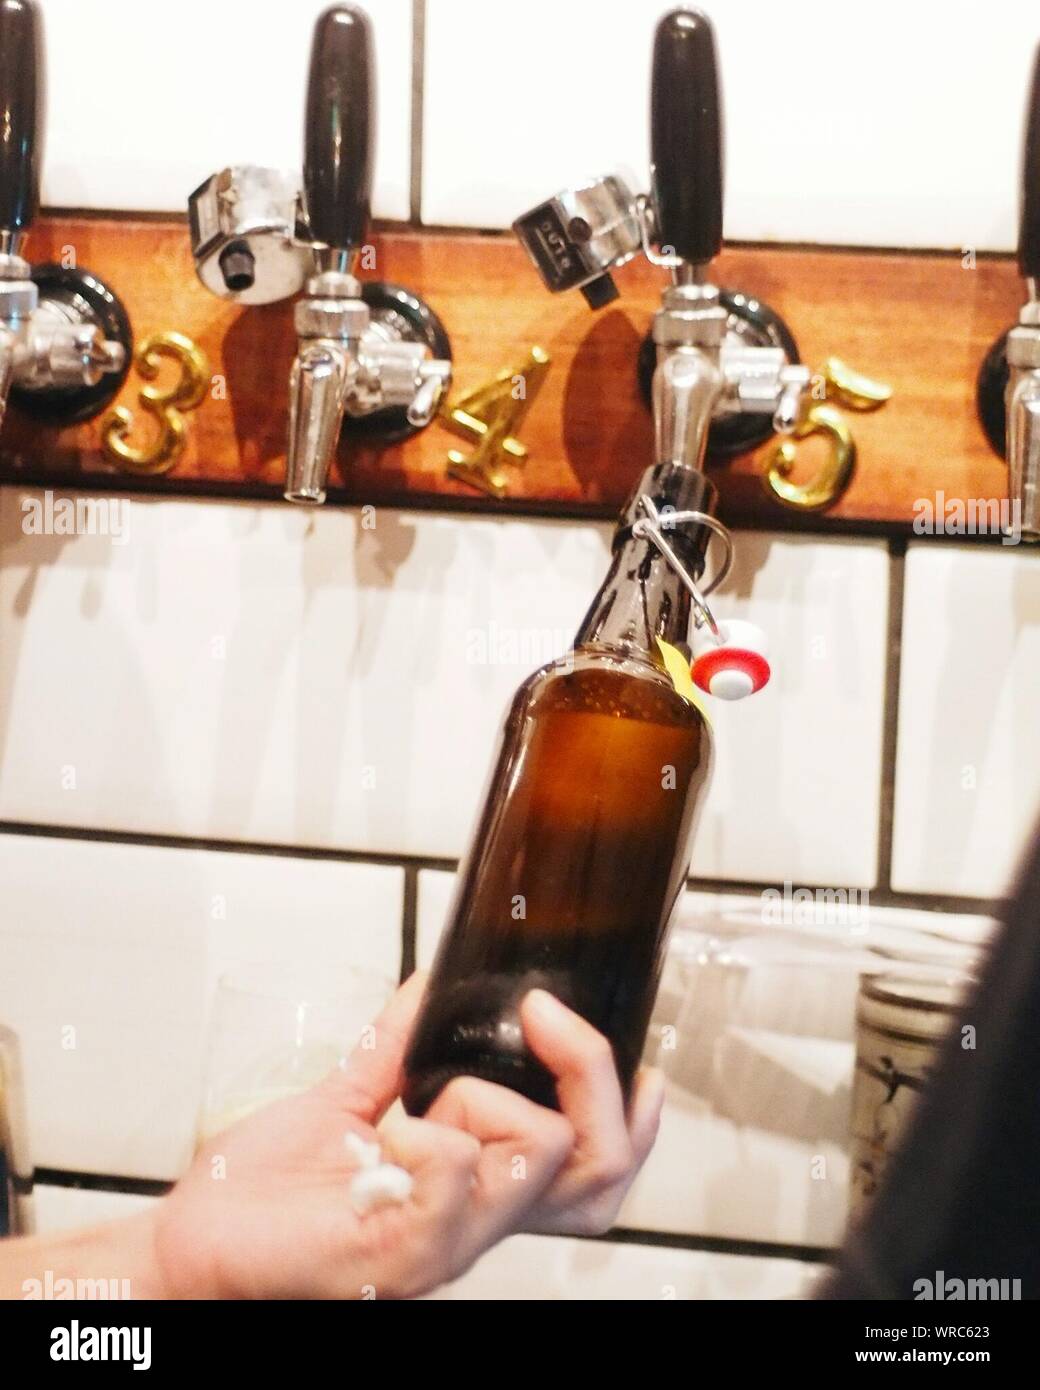 Cropped Hand Filling Bottle From Beer Tap In Restaurant Stock Photo